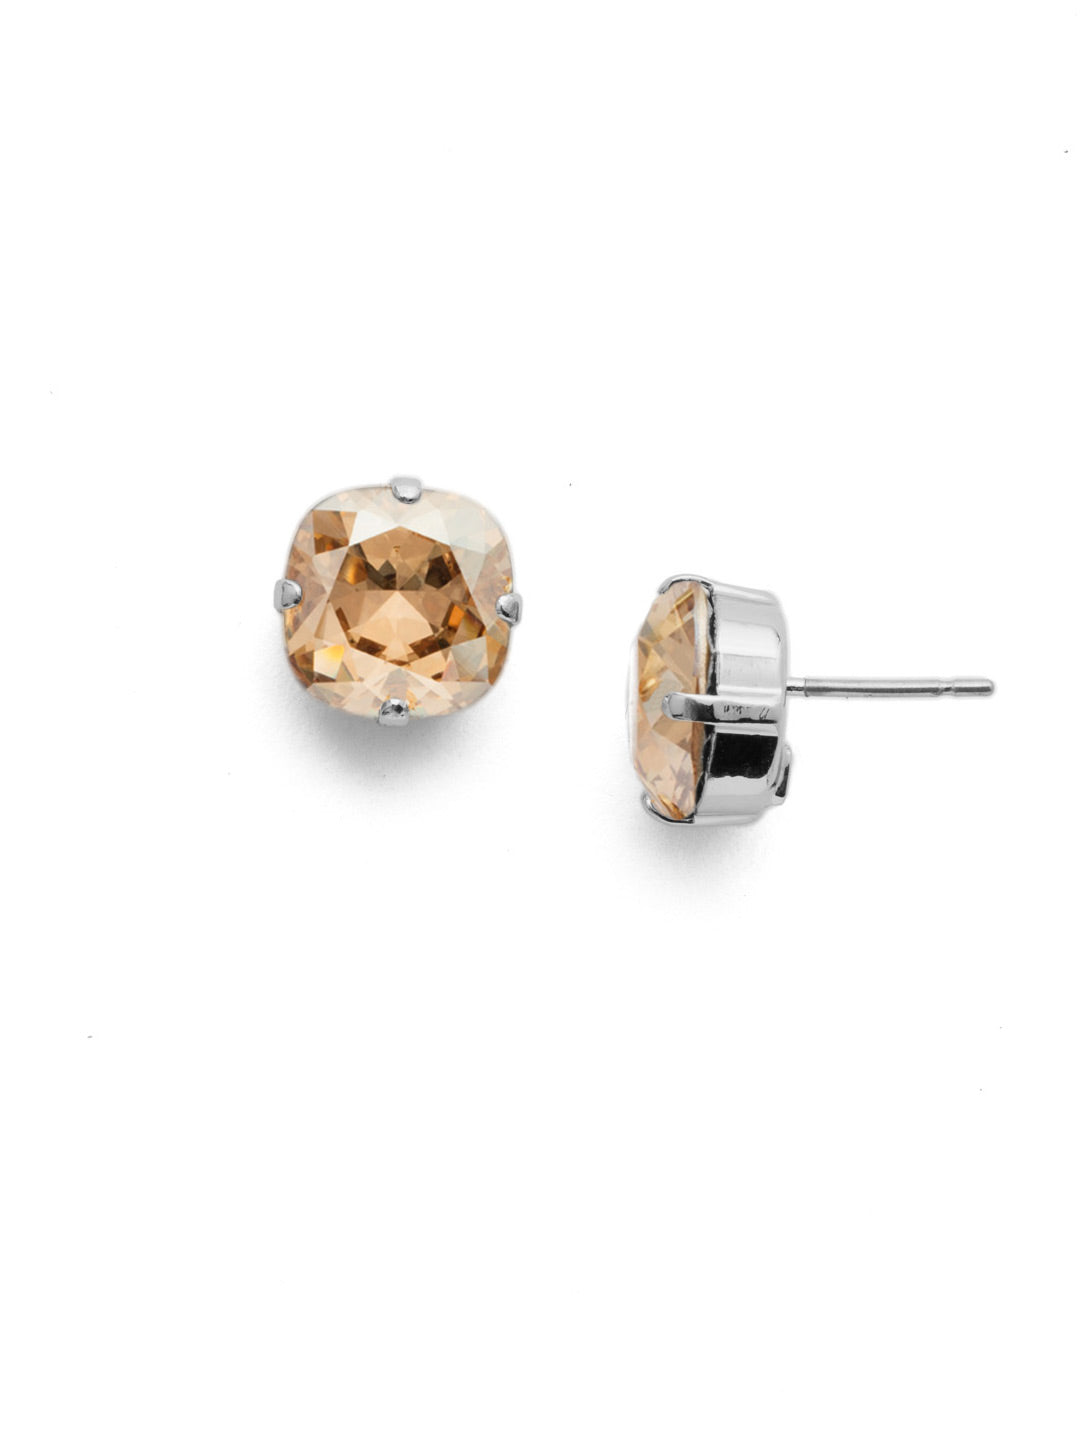 Halcyon Stud Earrings - EDH25PDDCH - <p>A beautiful, luminous cushion-cut crystal in a classic four-pronged setting that's ideal for everyday wear. From Sorrelli's Dark Champagne collection in our Palladium finish.</p>